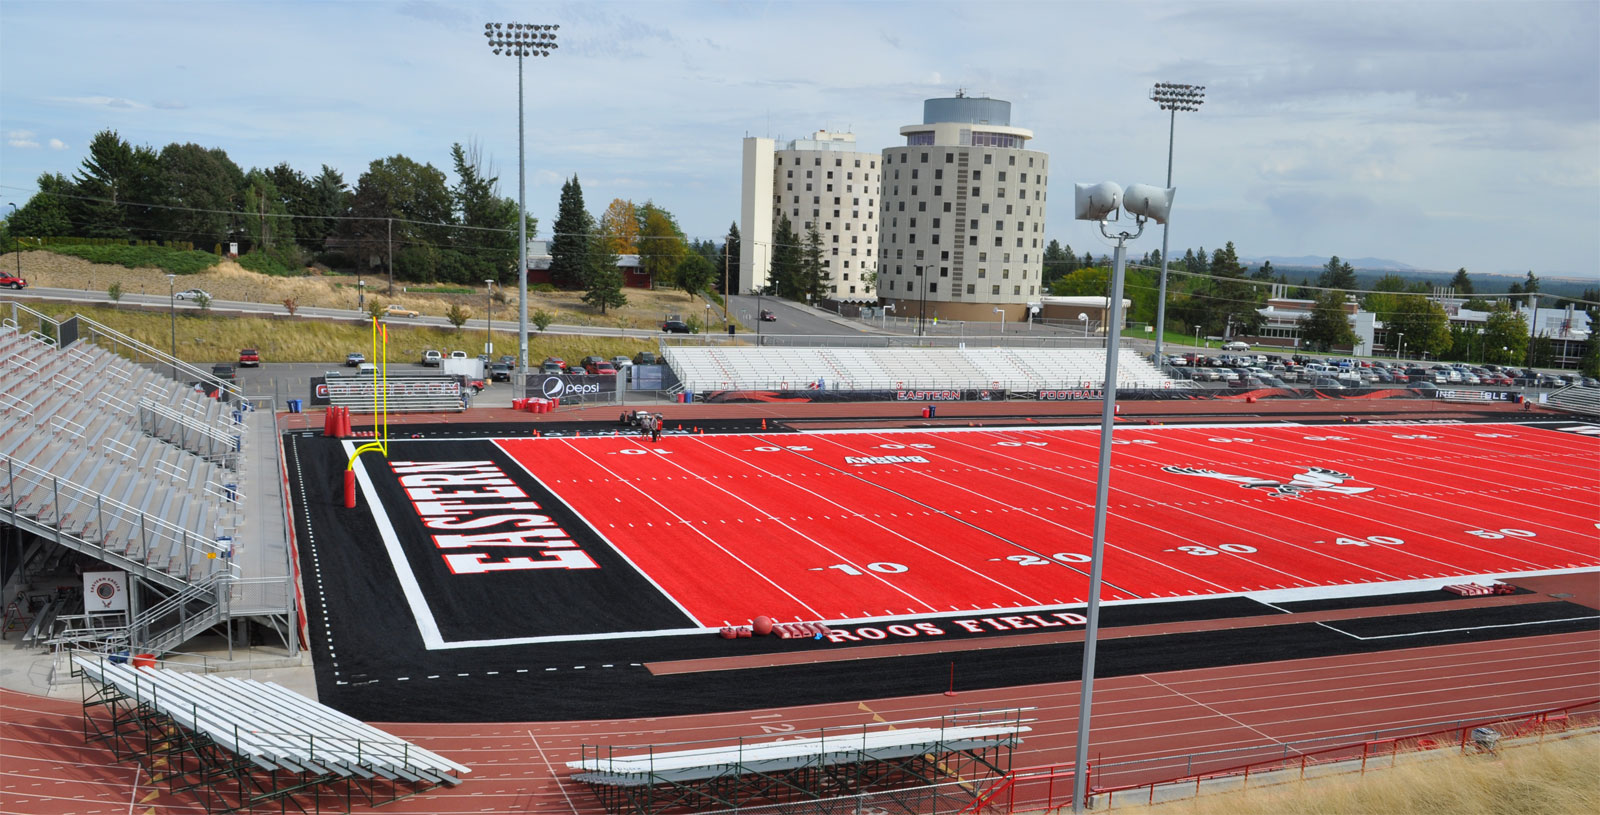 EWU rolls out the Red Turf CampusGrotto